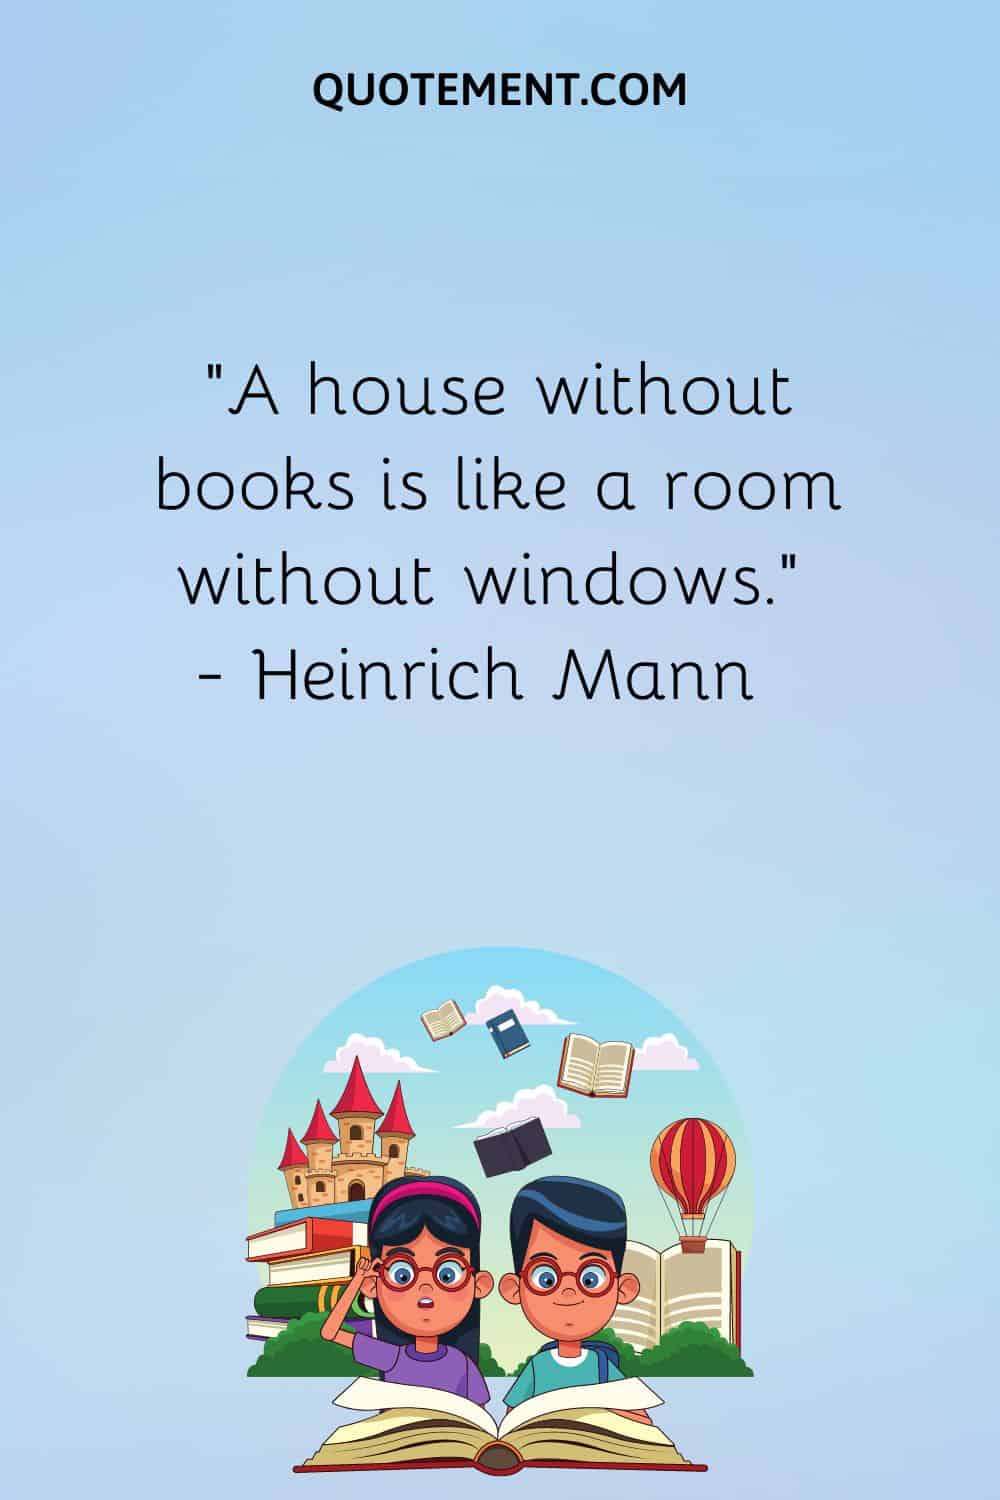 “A house without books is like a room without windows.” — Heinrich Mann